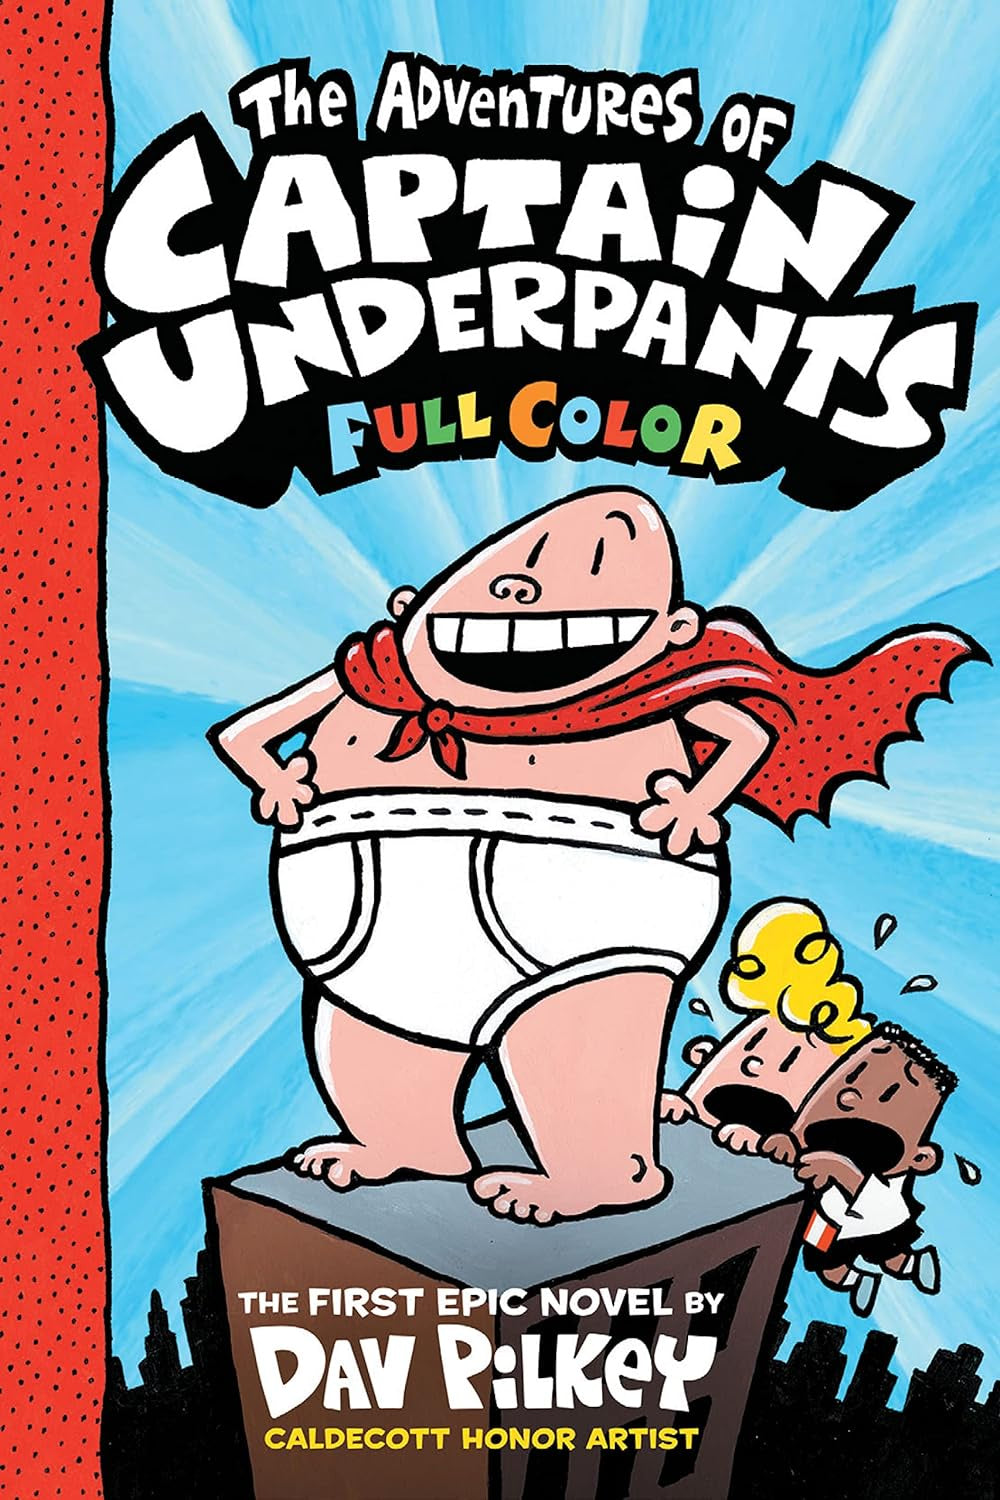 The Adventures of Captain Underpants 25 1/2 Anniversary Edition#1 with Dog Man Comics